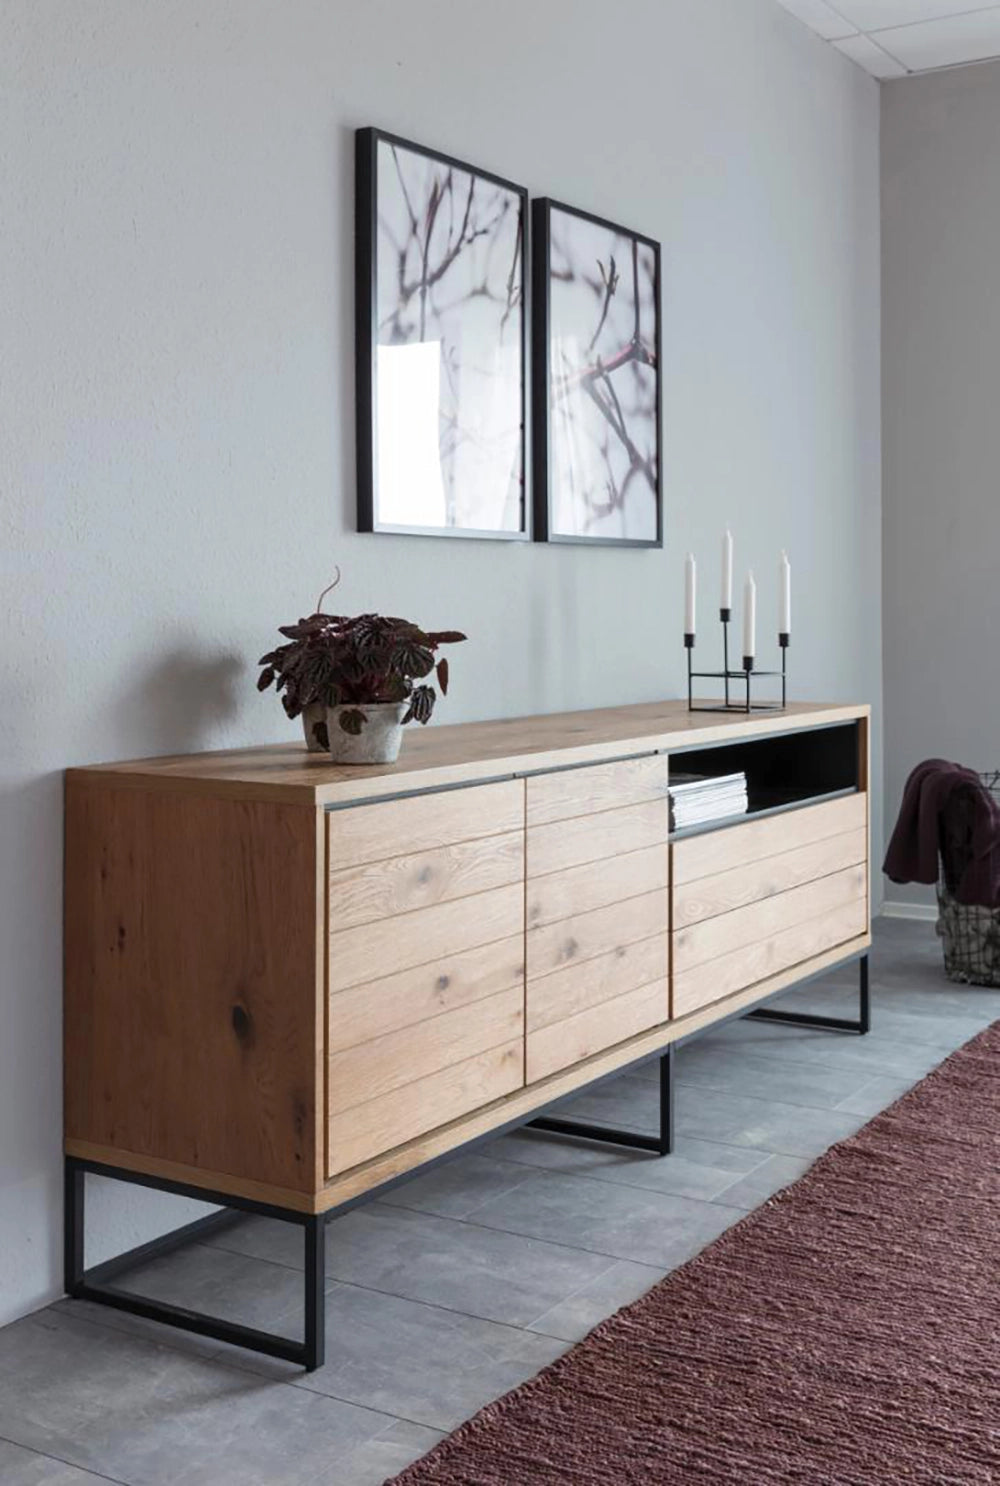 Lara Large Sideboard in Matte Oak Finish with Wall Frame and Candle in Living Room Setting